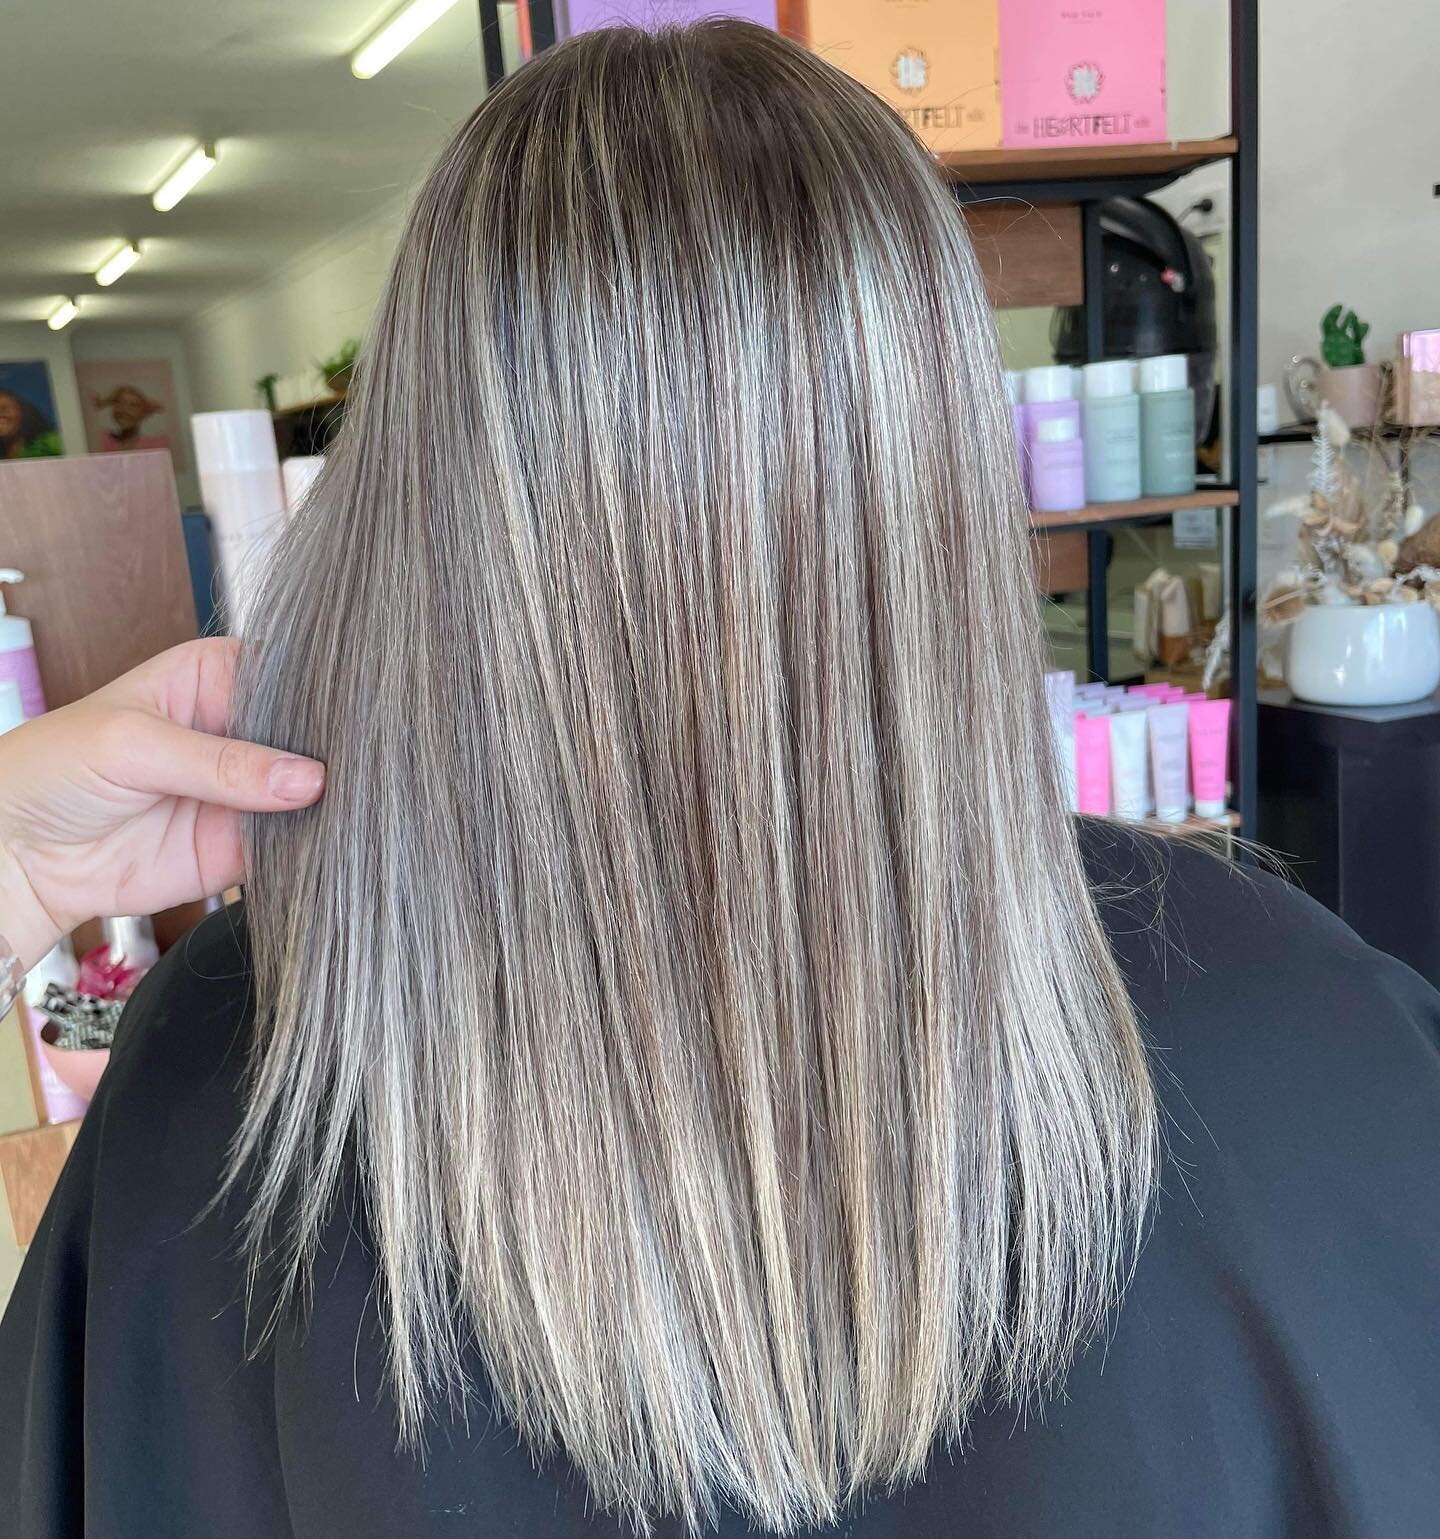 We are living for all of these light to dark transformations 😍😍
Who else has been thinking about adding depth &amp; dimension to their blonde? 
Created by @alice_thehairshack 🎨✨💖